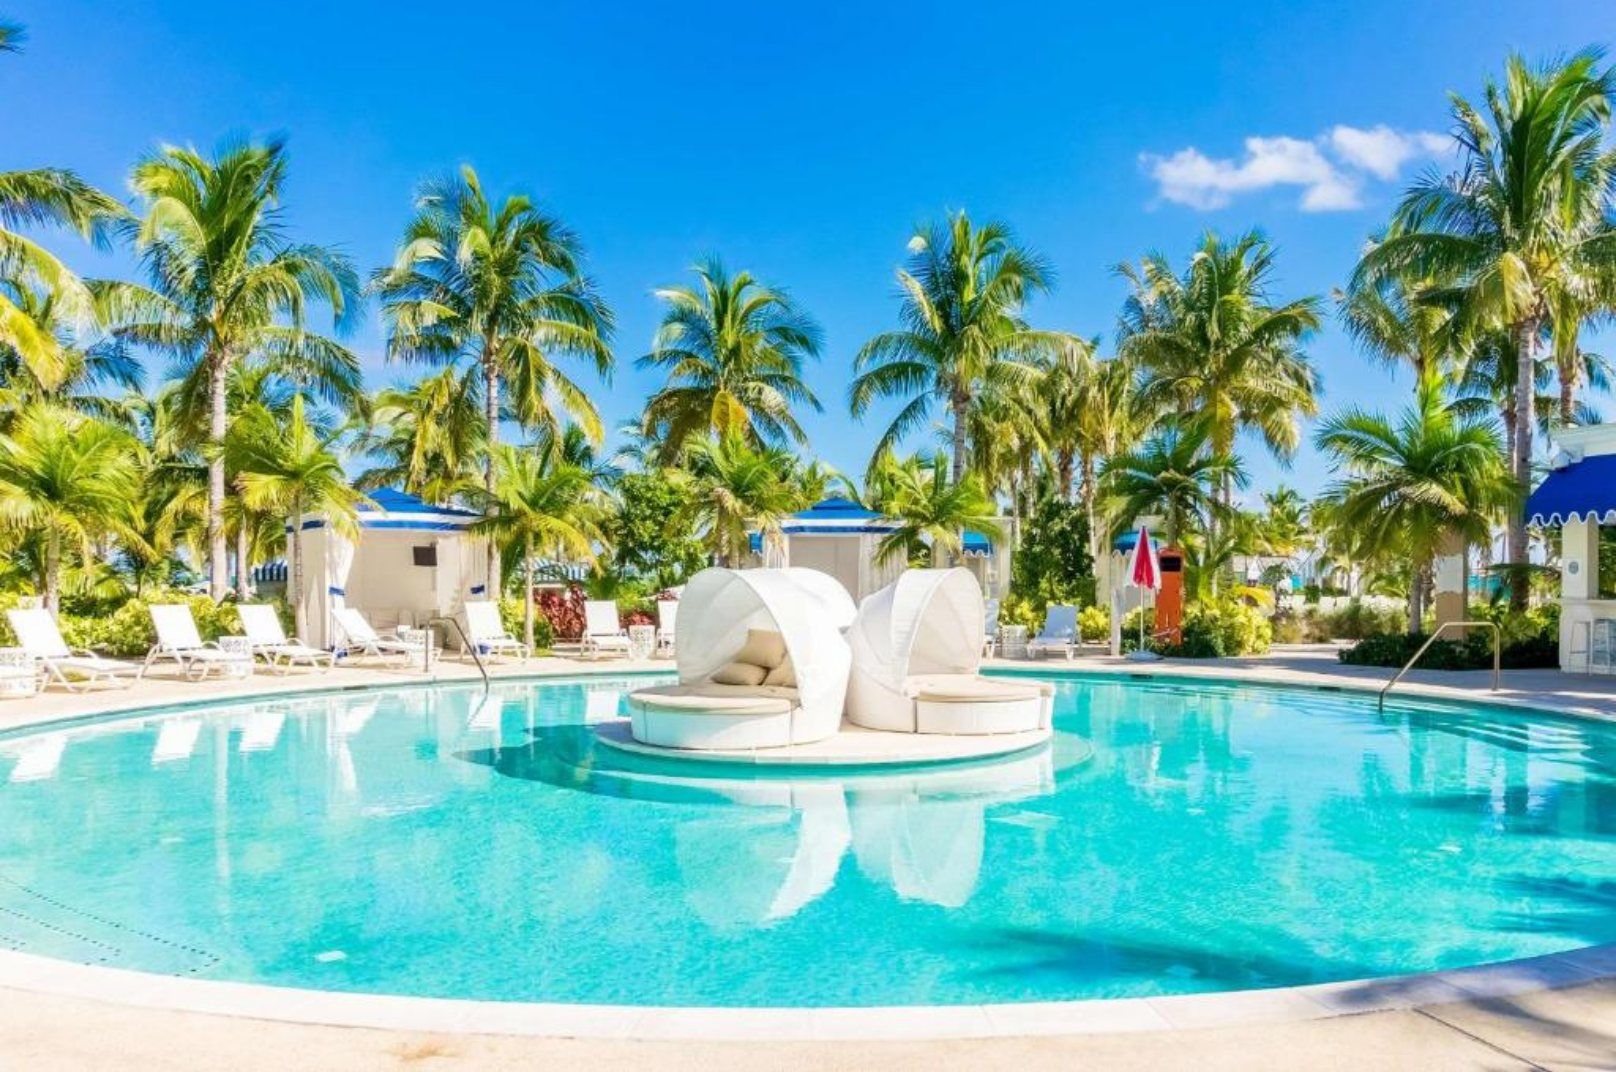 The Best Hotels in The Bahamas for Your Dream Trip | Lucy On Locale